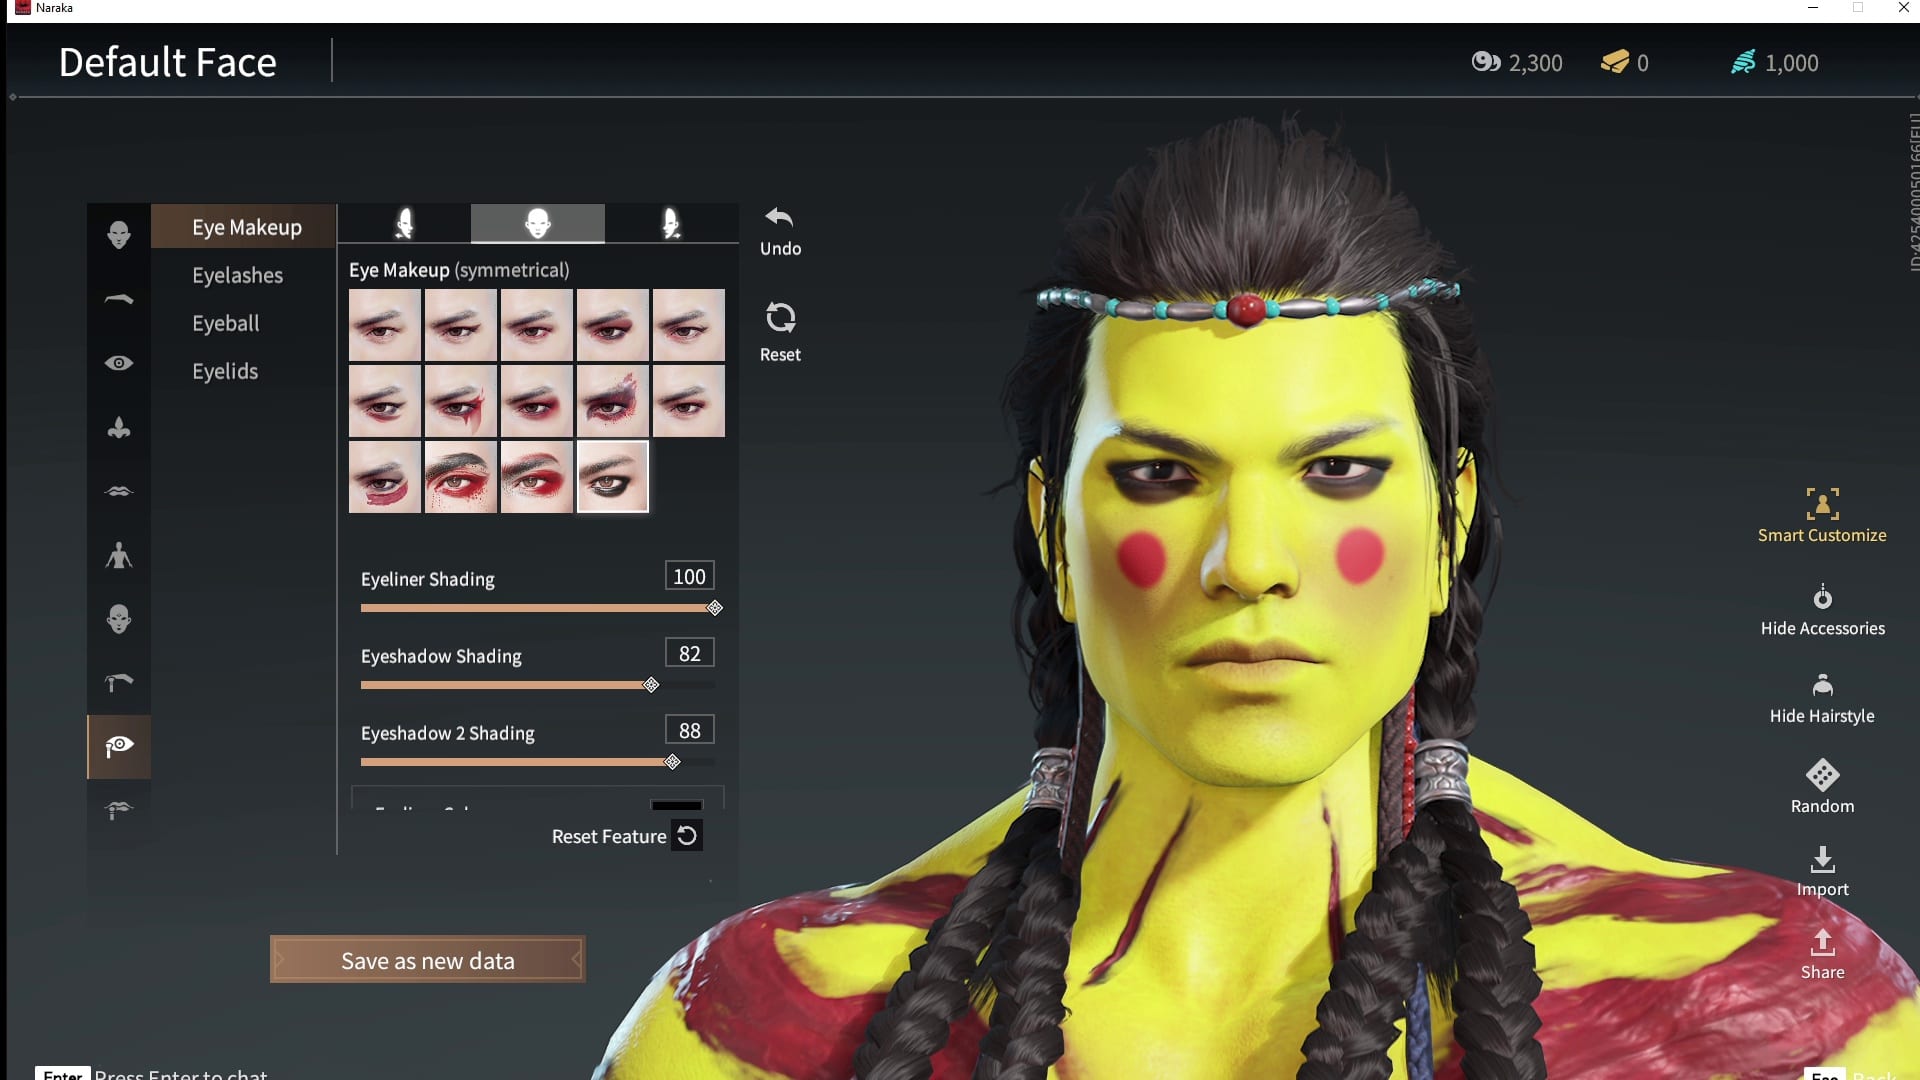 With the huge character editor, we can customise our heroes to our liking, even becoming Pikachu.